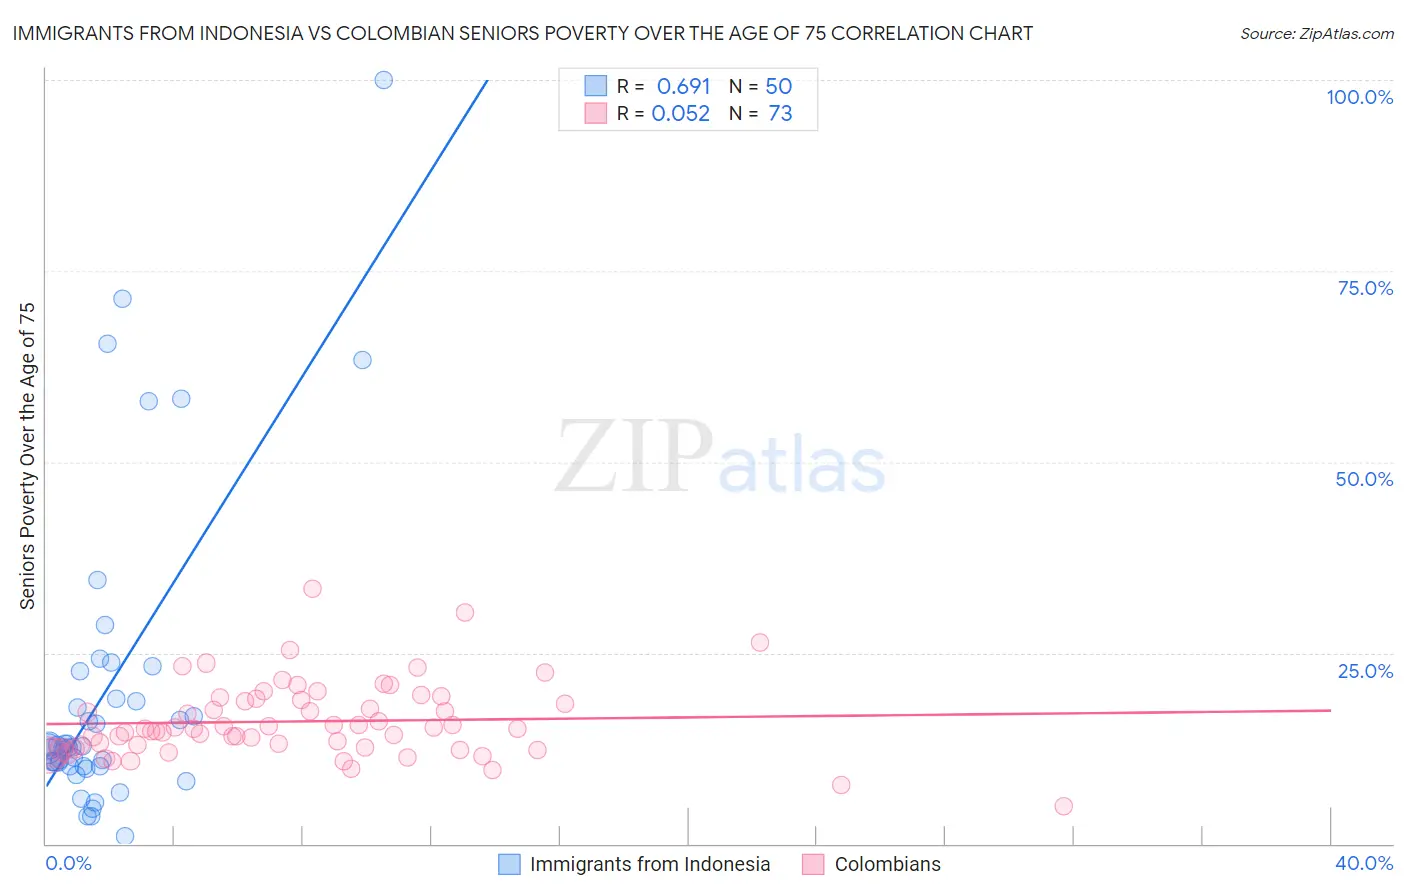 Immigrants from Indonesia vs Colombian Seniors Poverty Over the Age of 75